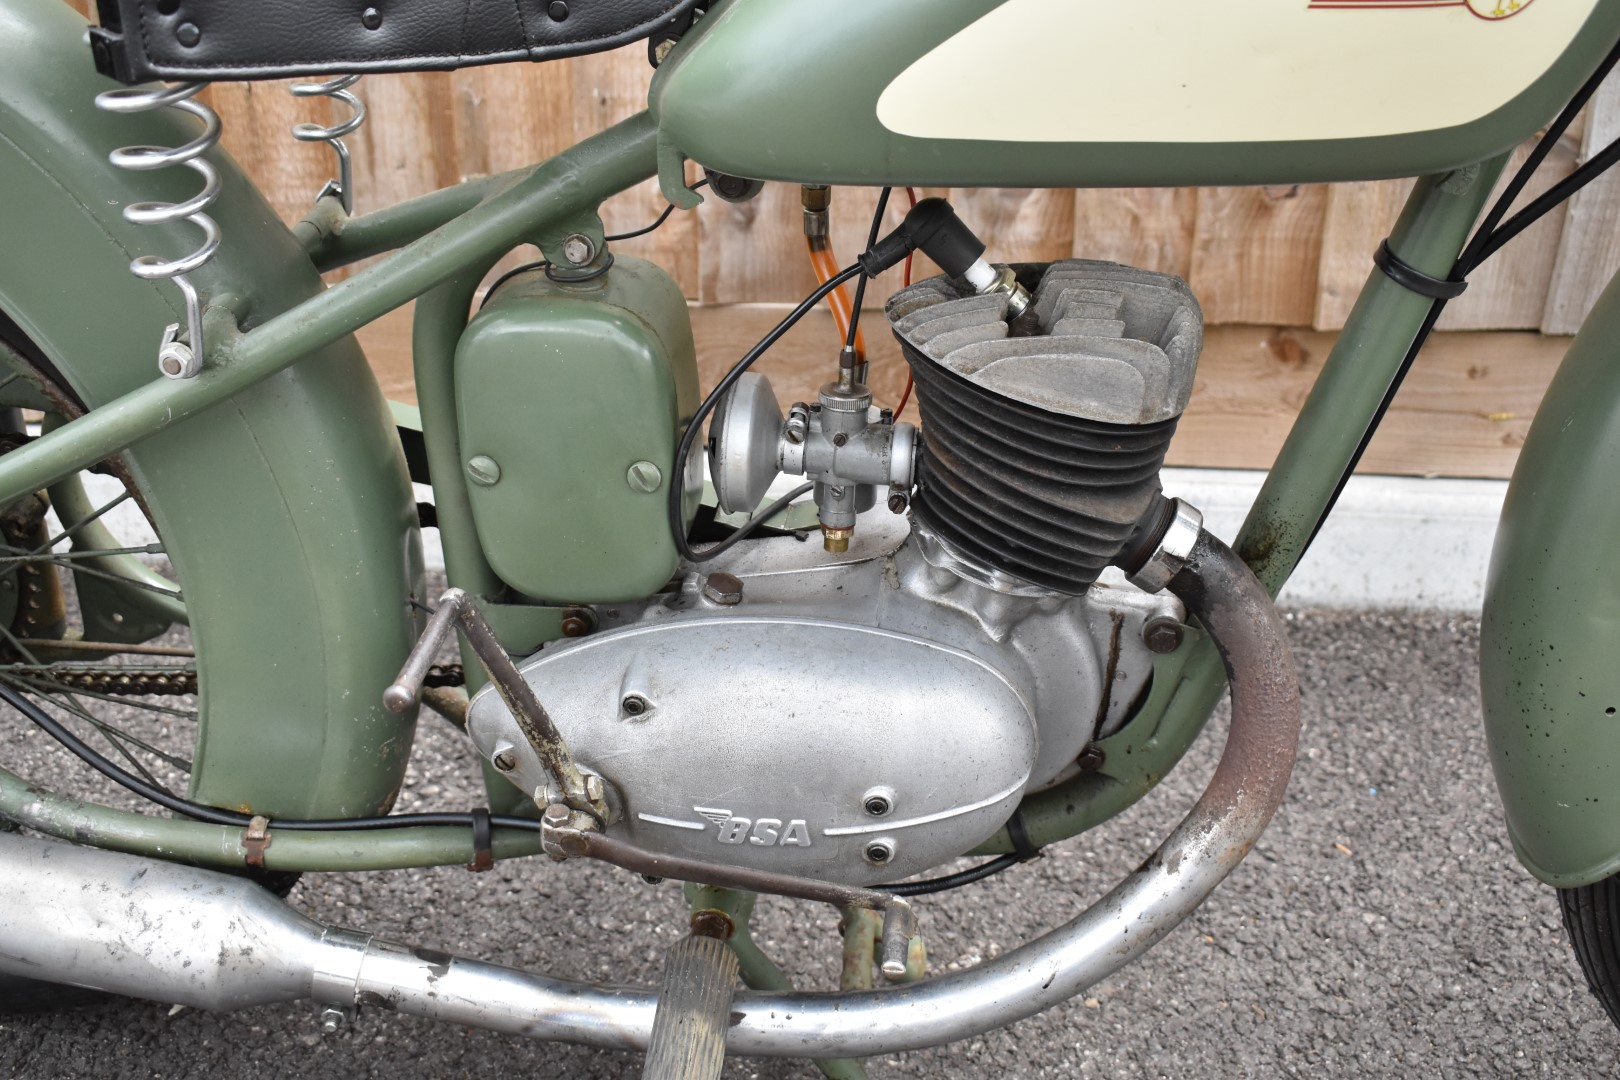 1952 BSA Bantam D1 125cc two stroke plunger motorbike, transferable registration number PHU 5,  with - Image 2 of 15